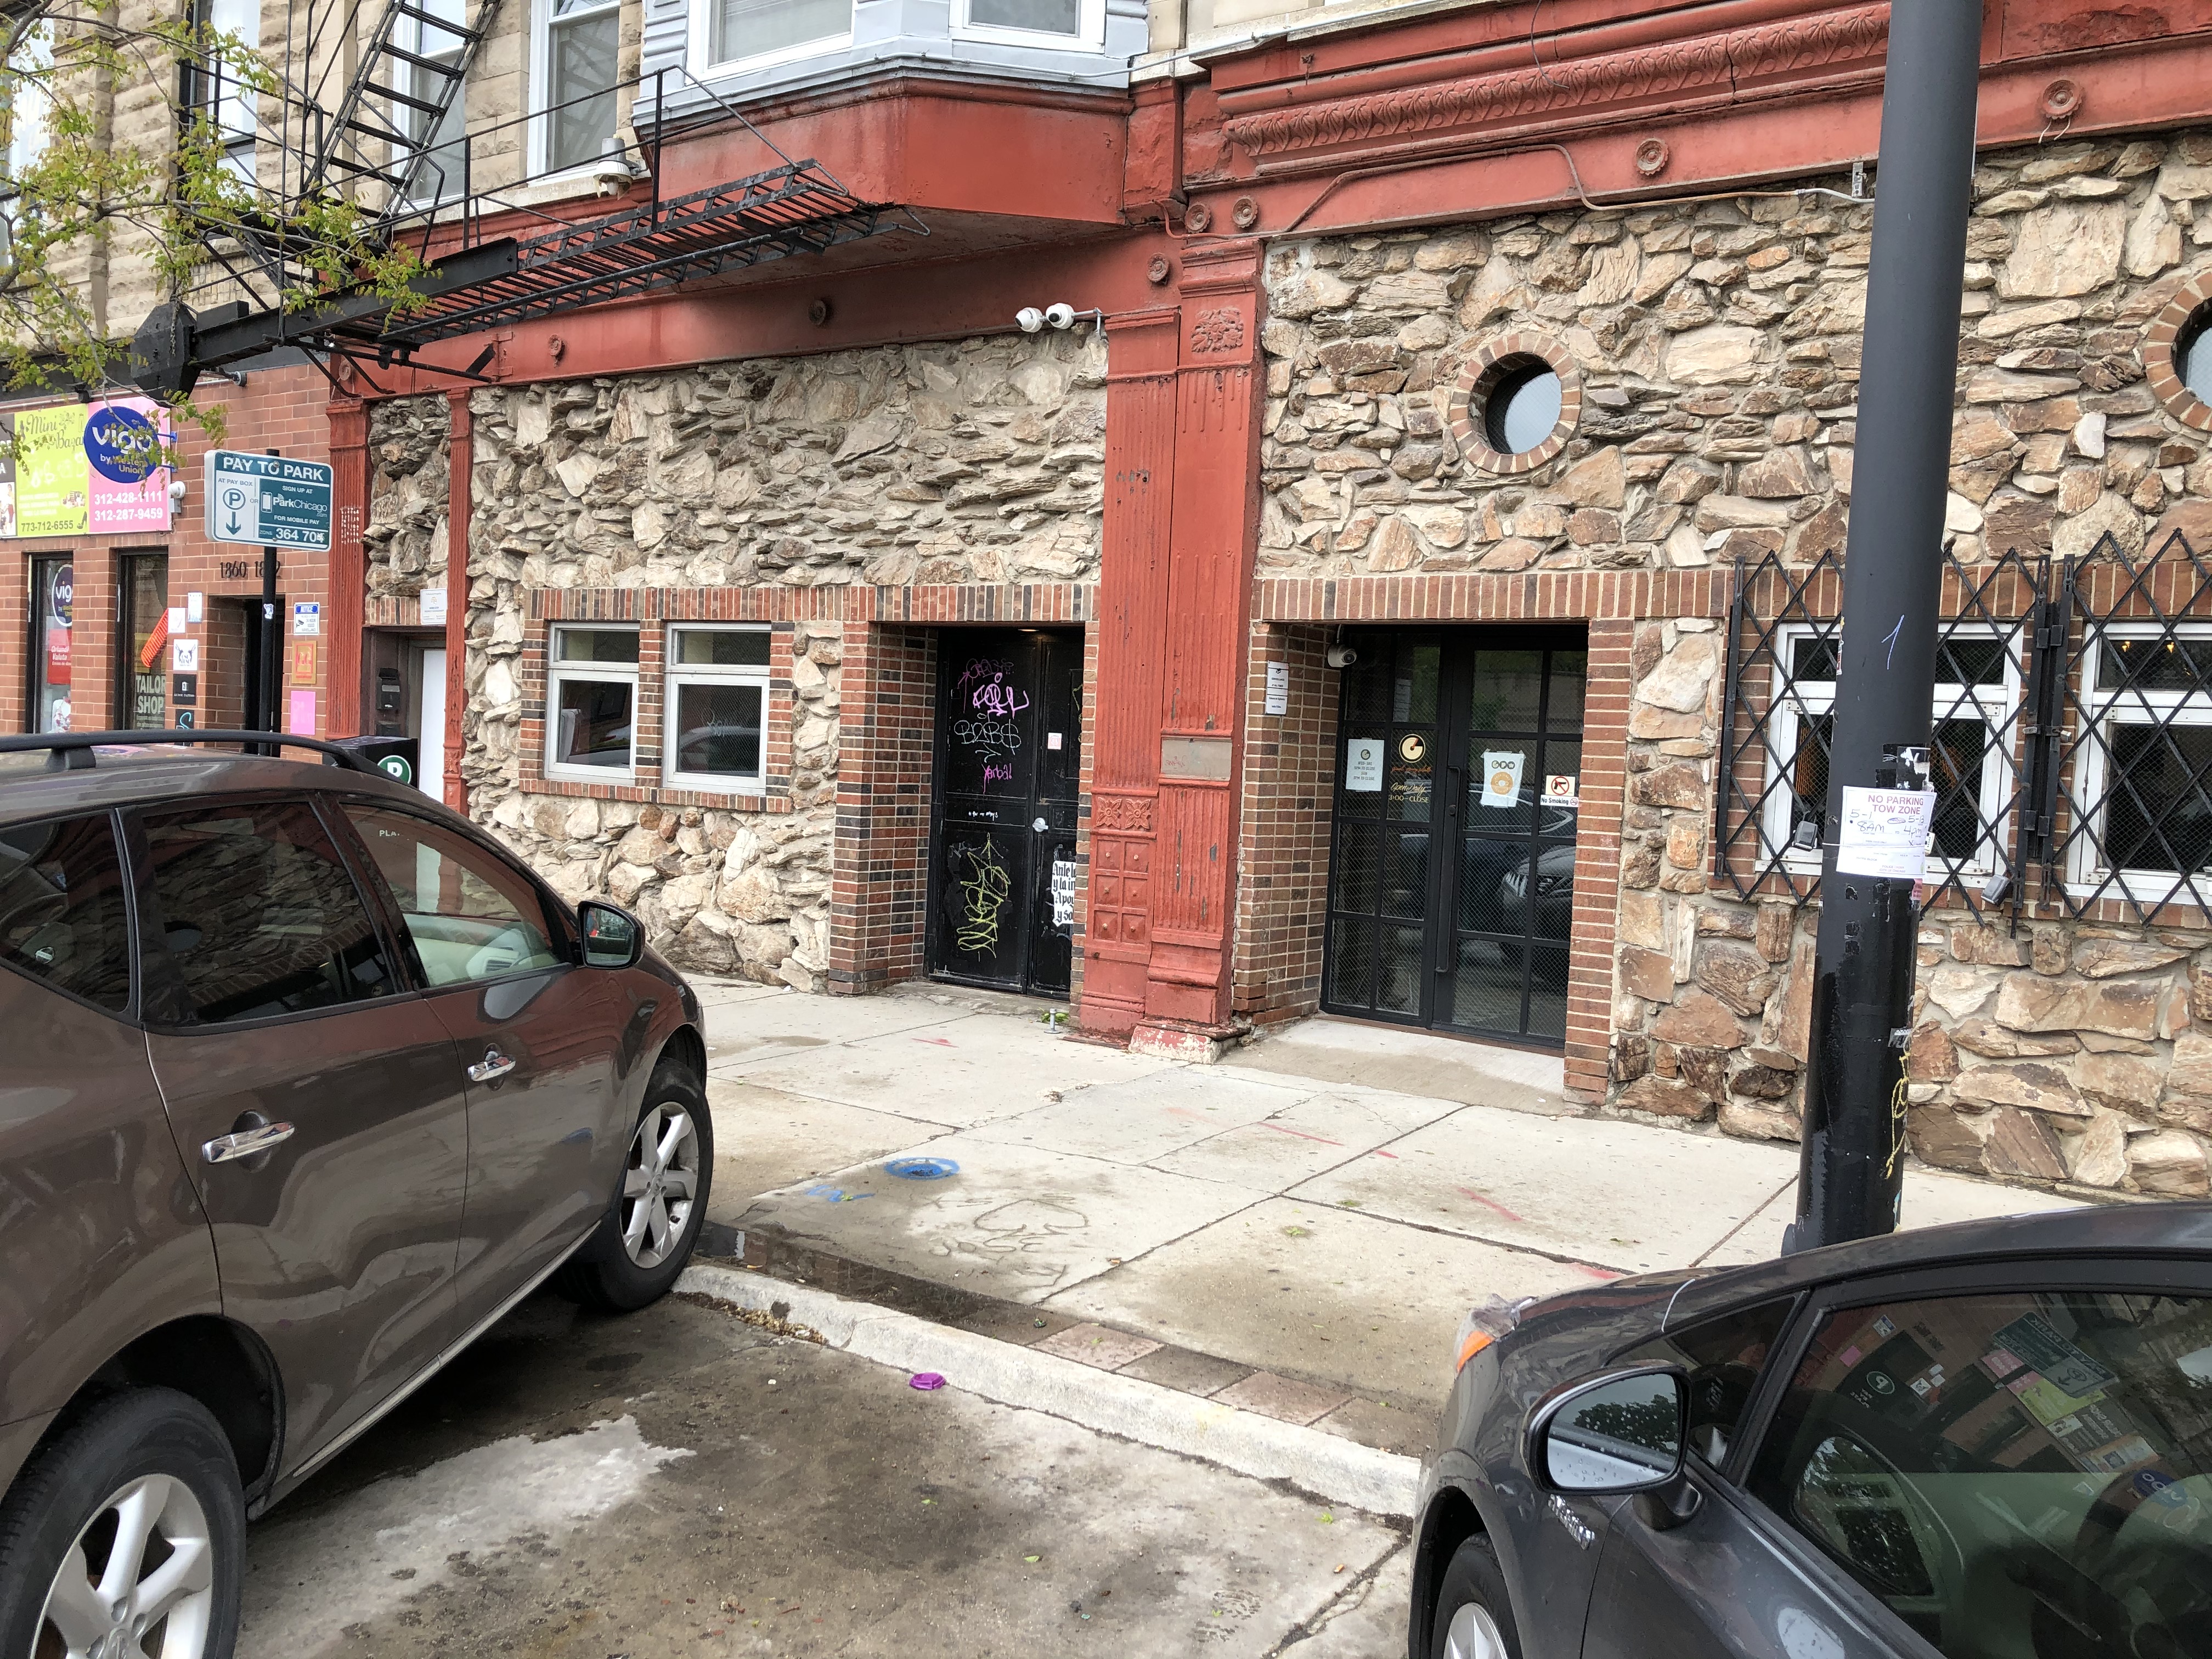 City Hall’s inspector general says in a new report that the Lightfoot administration had no legal authority to issue a liquor license to The Giant Penny Whistle tavern.